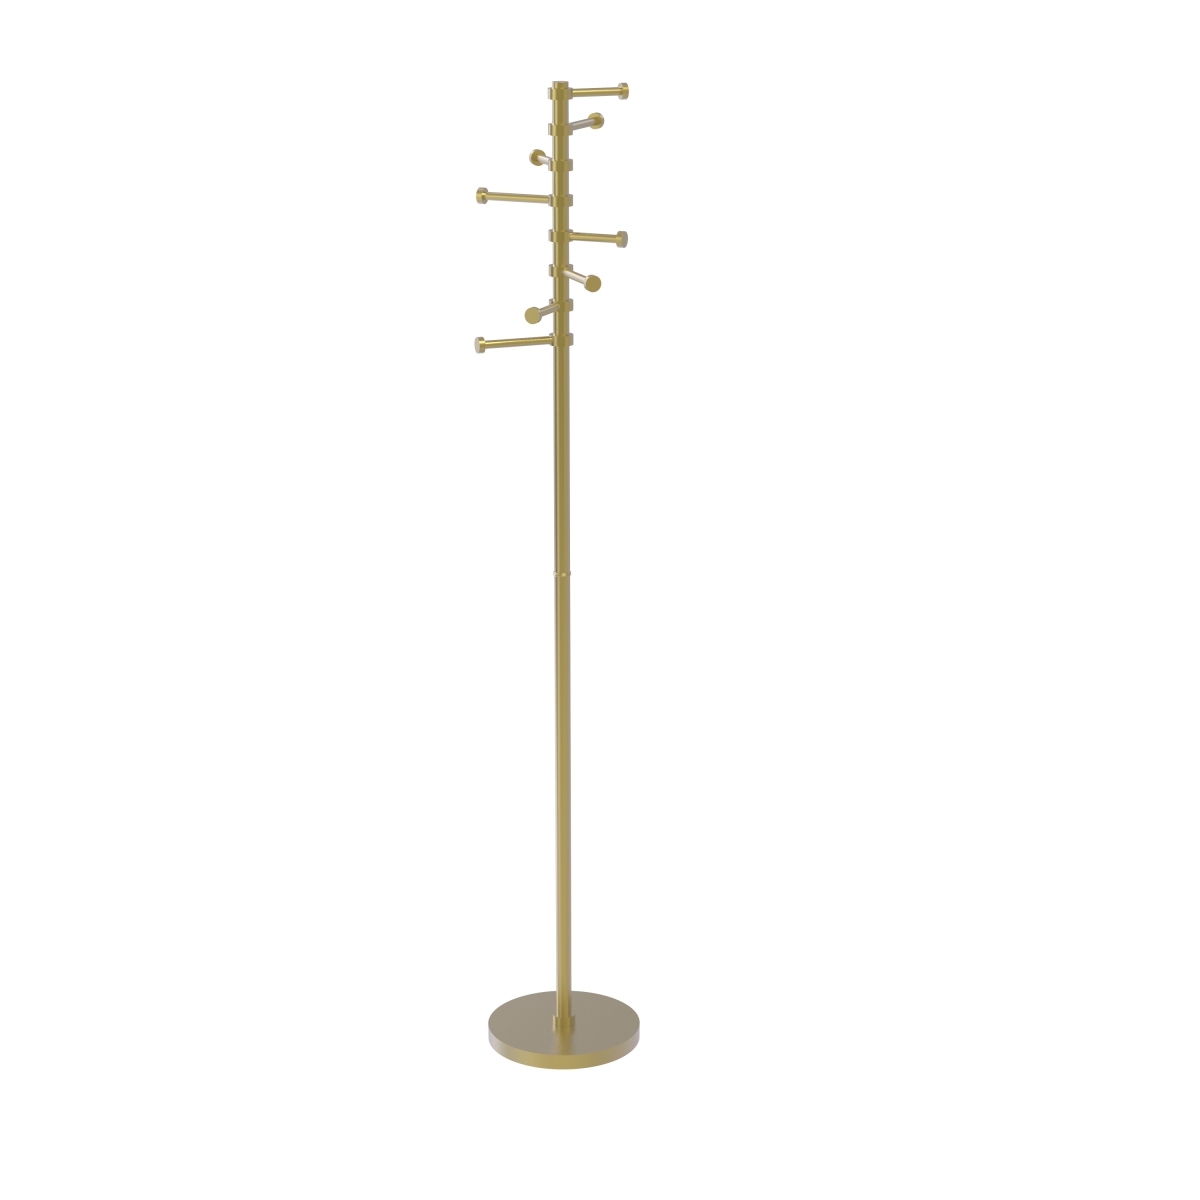 Picture of Allied Brass CS-1-SBR Free Standing Coat Rack with Six Pivoting Pegs, Satin Brass